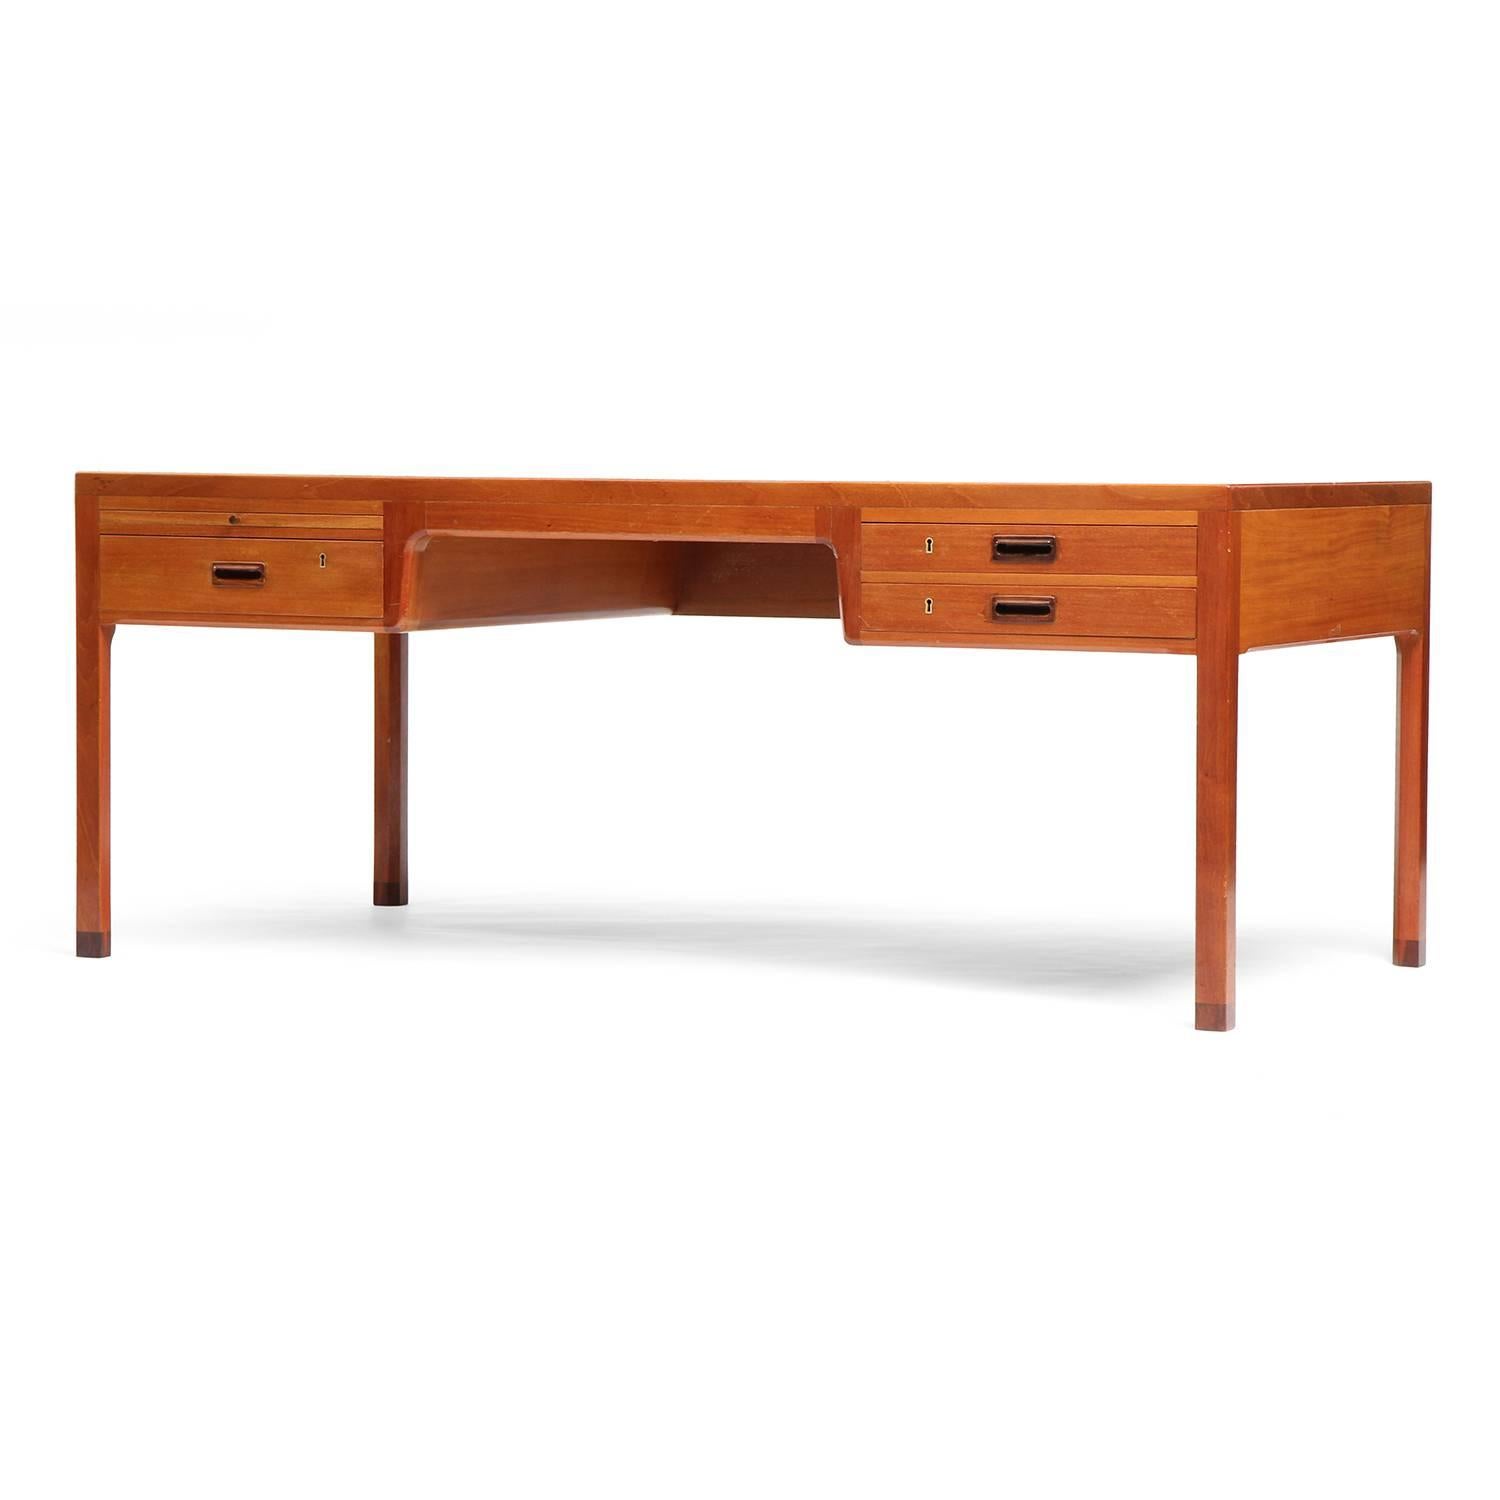 A superb, generously scaled and impeccably handcrafted desk in pale mahogany having a finely proportioned rectilinear form. The desk is fully finished on all sides; the drawers have carved recessed pulls and there is a retractable writing surface.